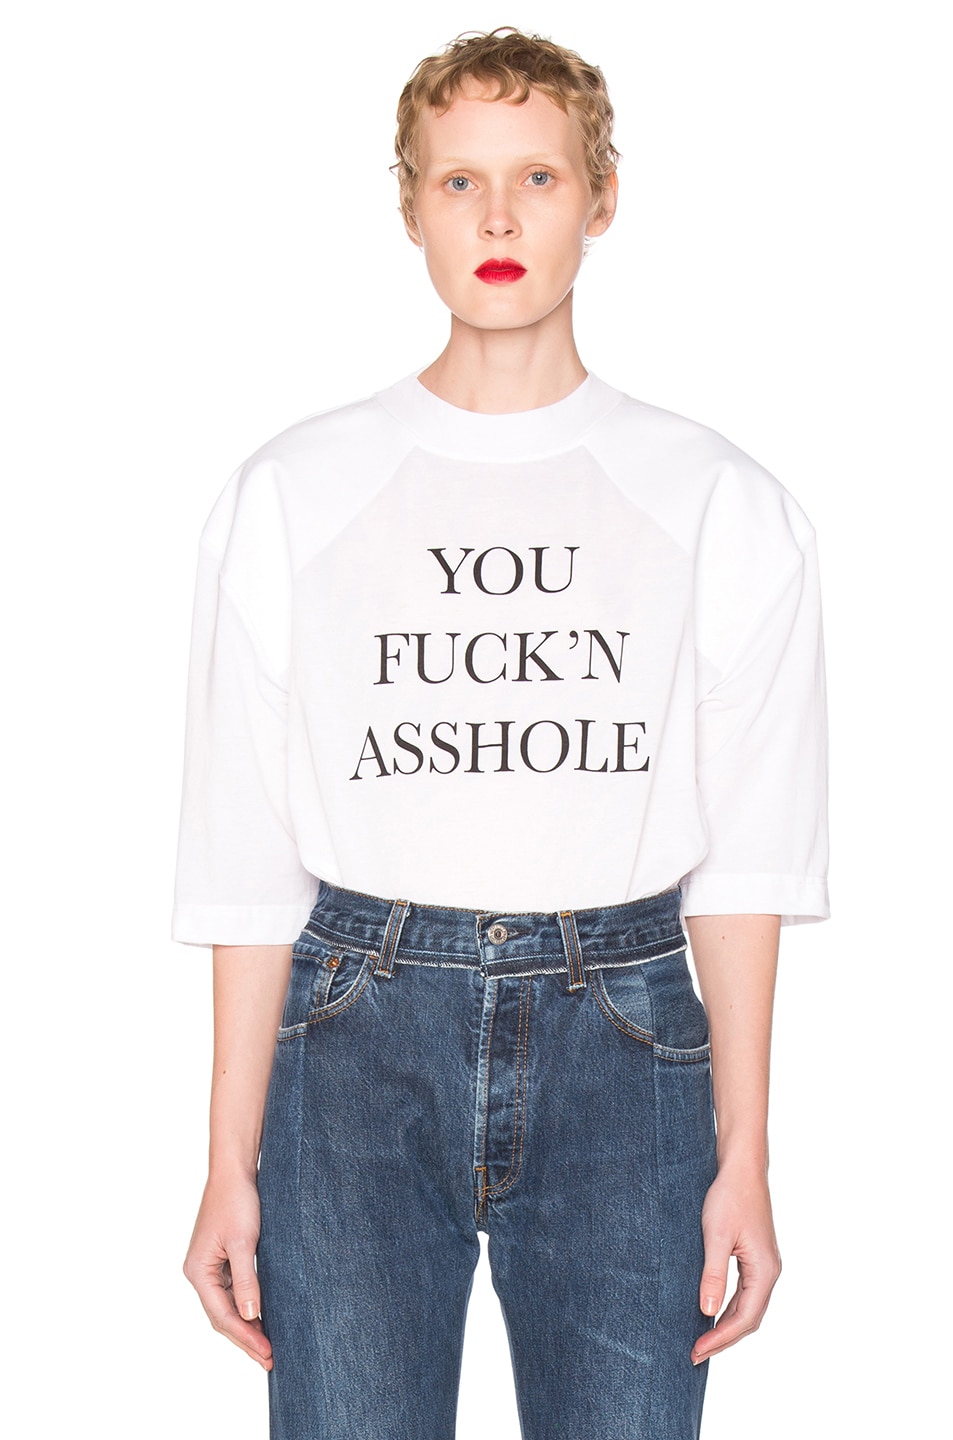 Image 1 of VETEMENTS Football Shoulder Tee Shirt You Fucking Asshole in White